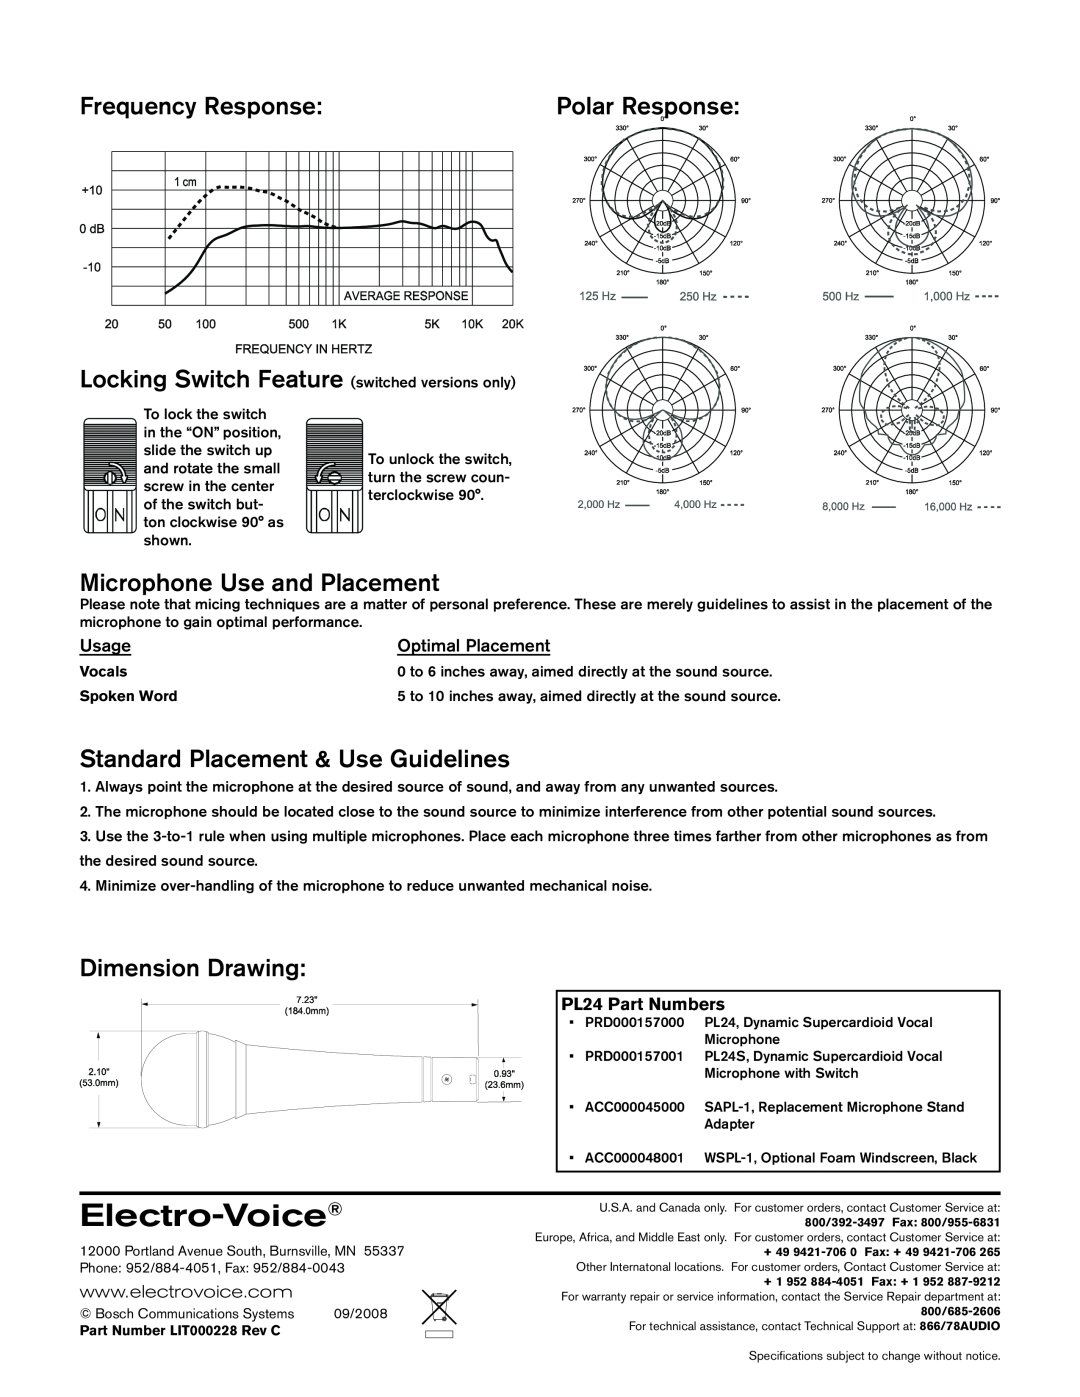 Electro-Voice PL24S Frequency Response, Microphone Use and Placement, Standard Placement & Use Guidelines, Electro-Voice 